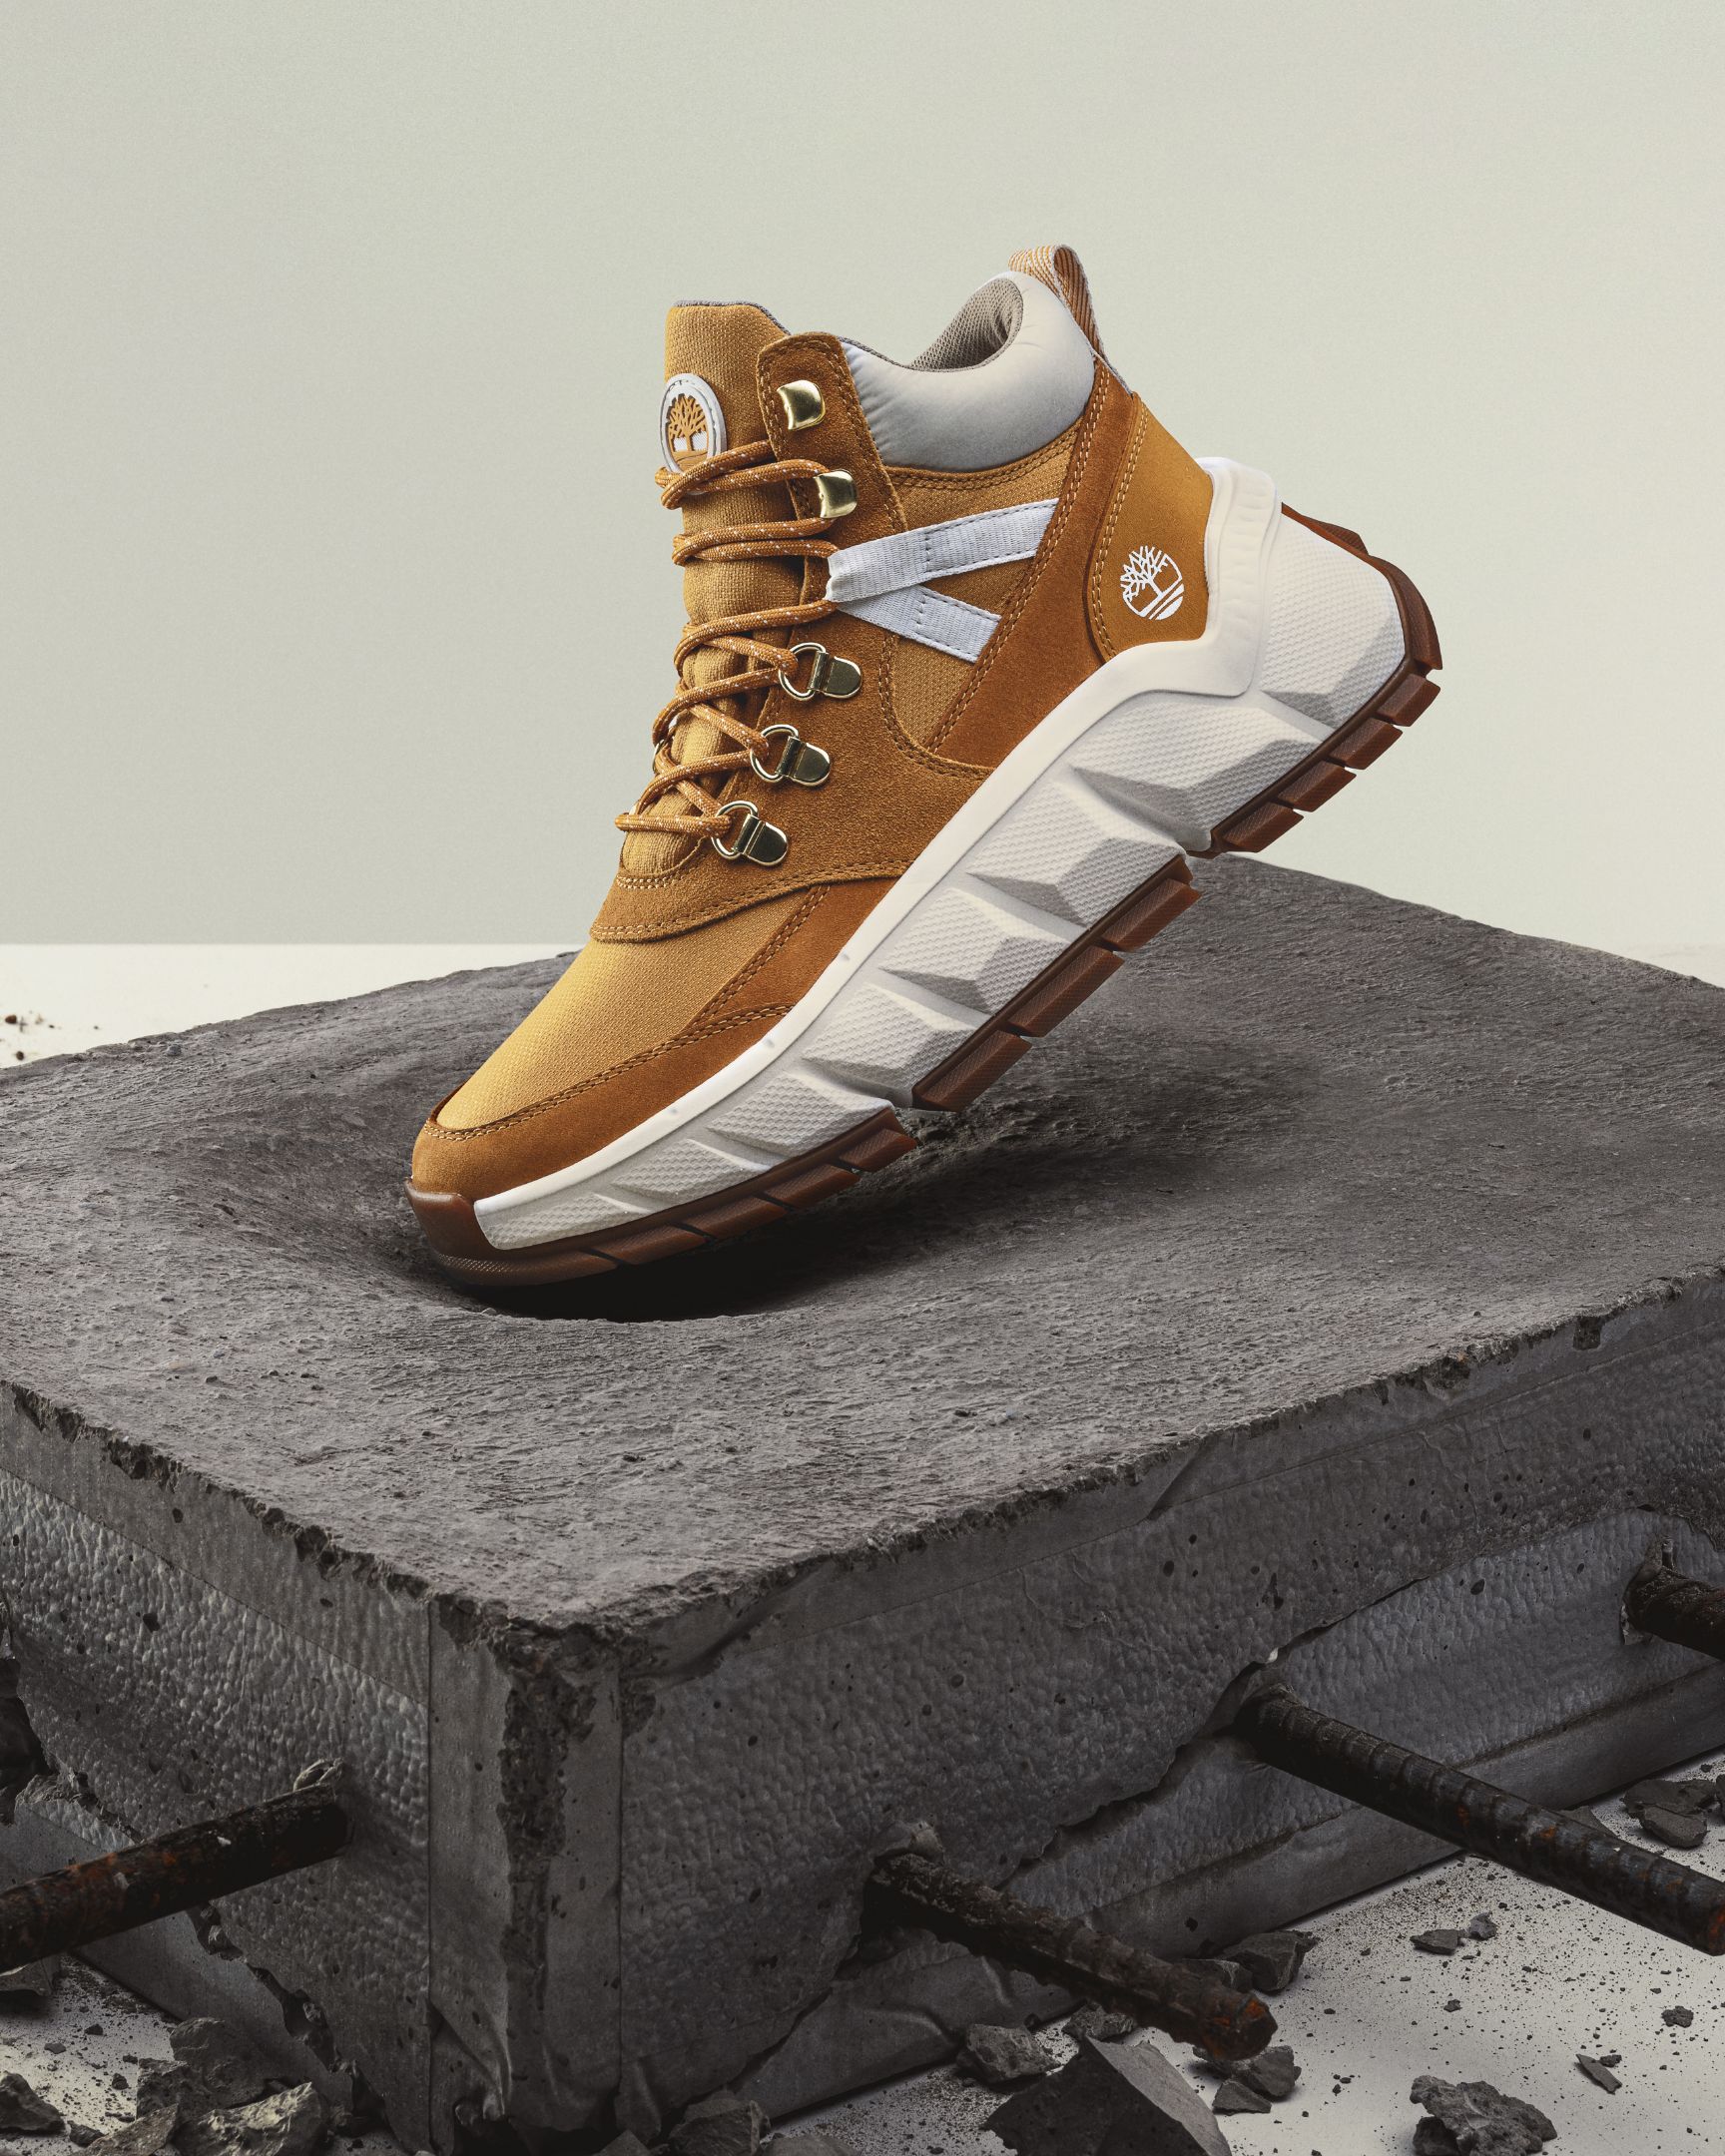 Timberland Greenstride Turbo Hiker TBL on concrete square with rebar